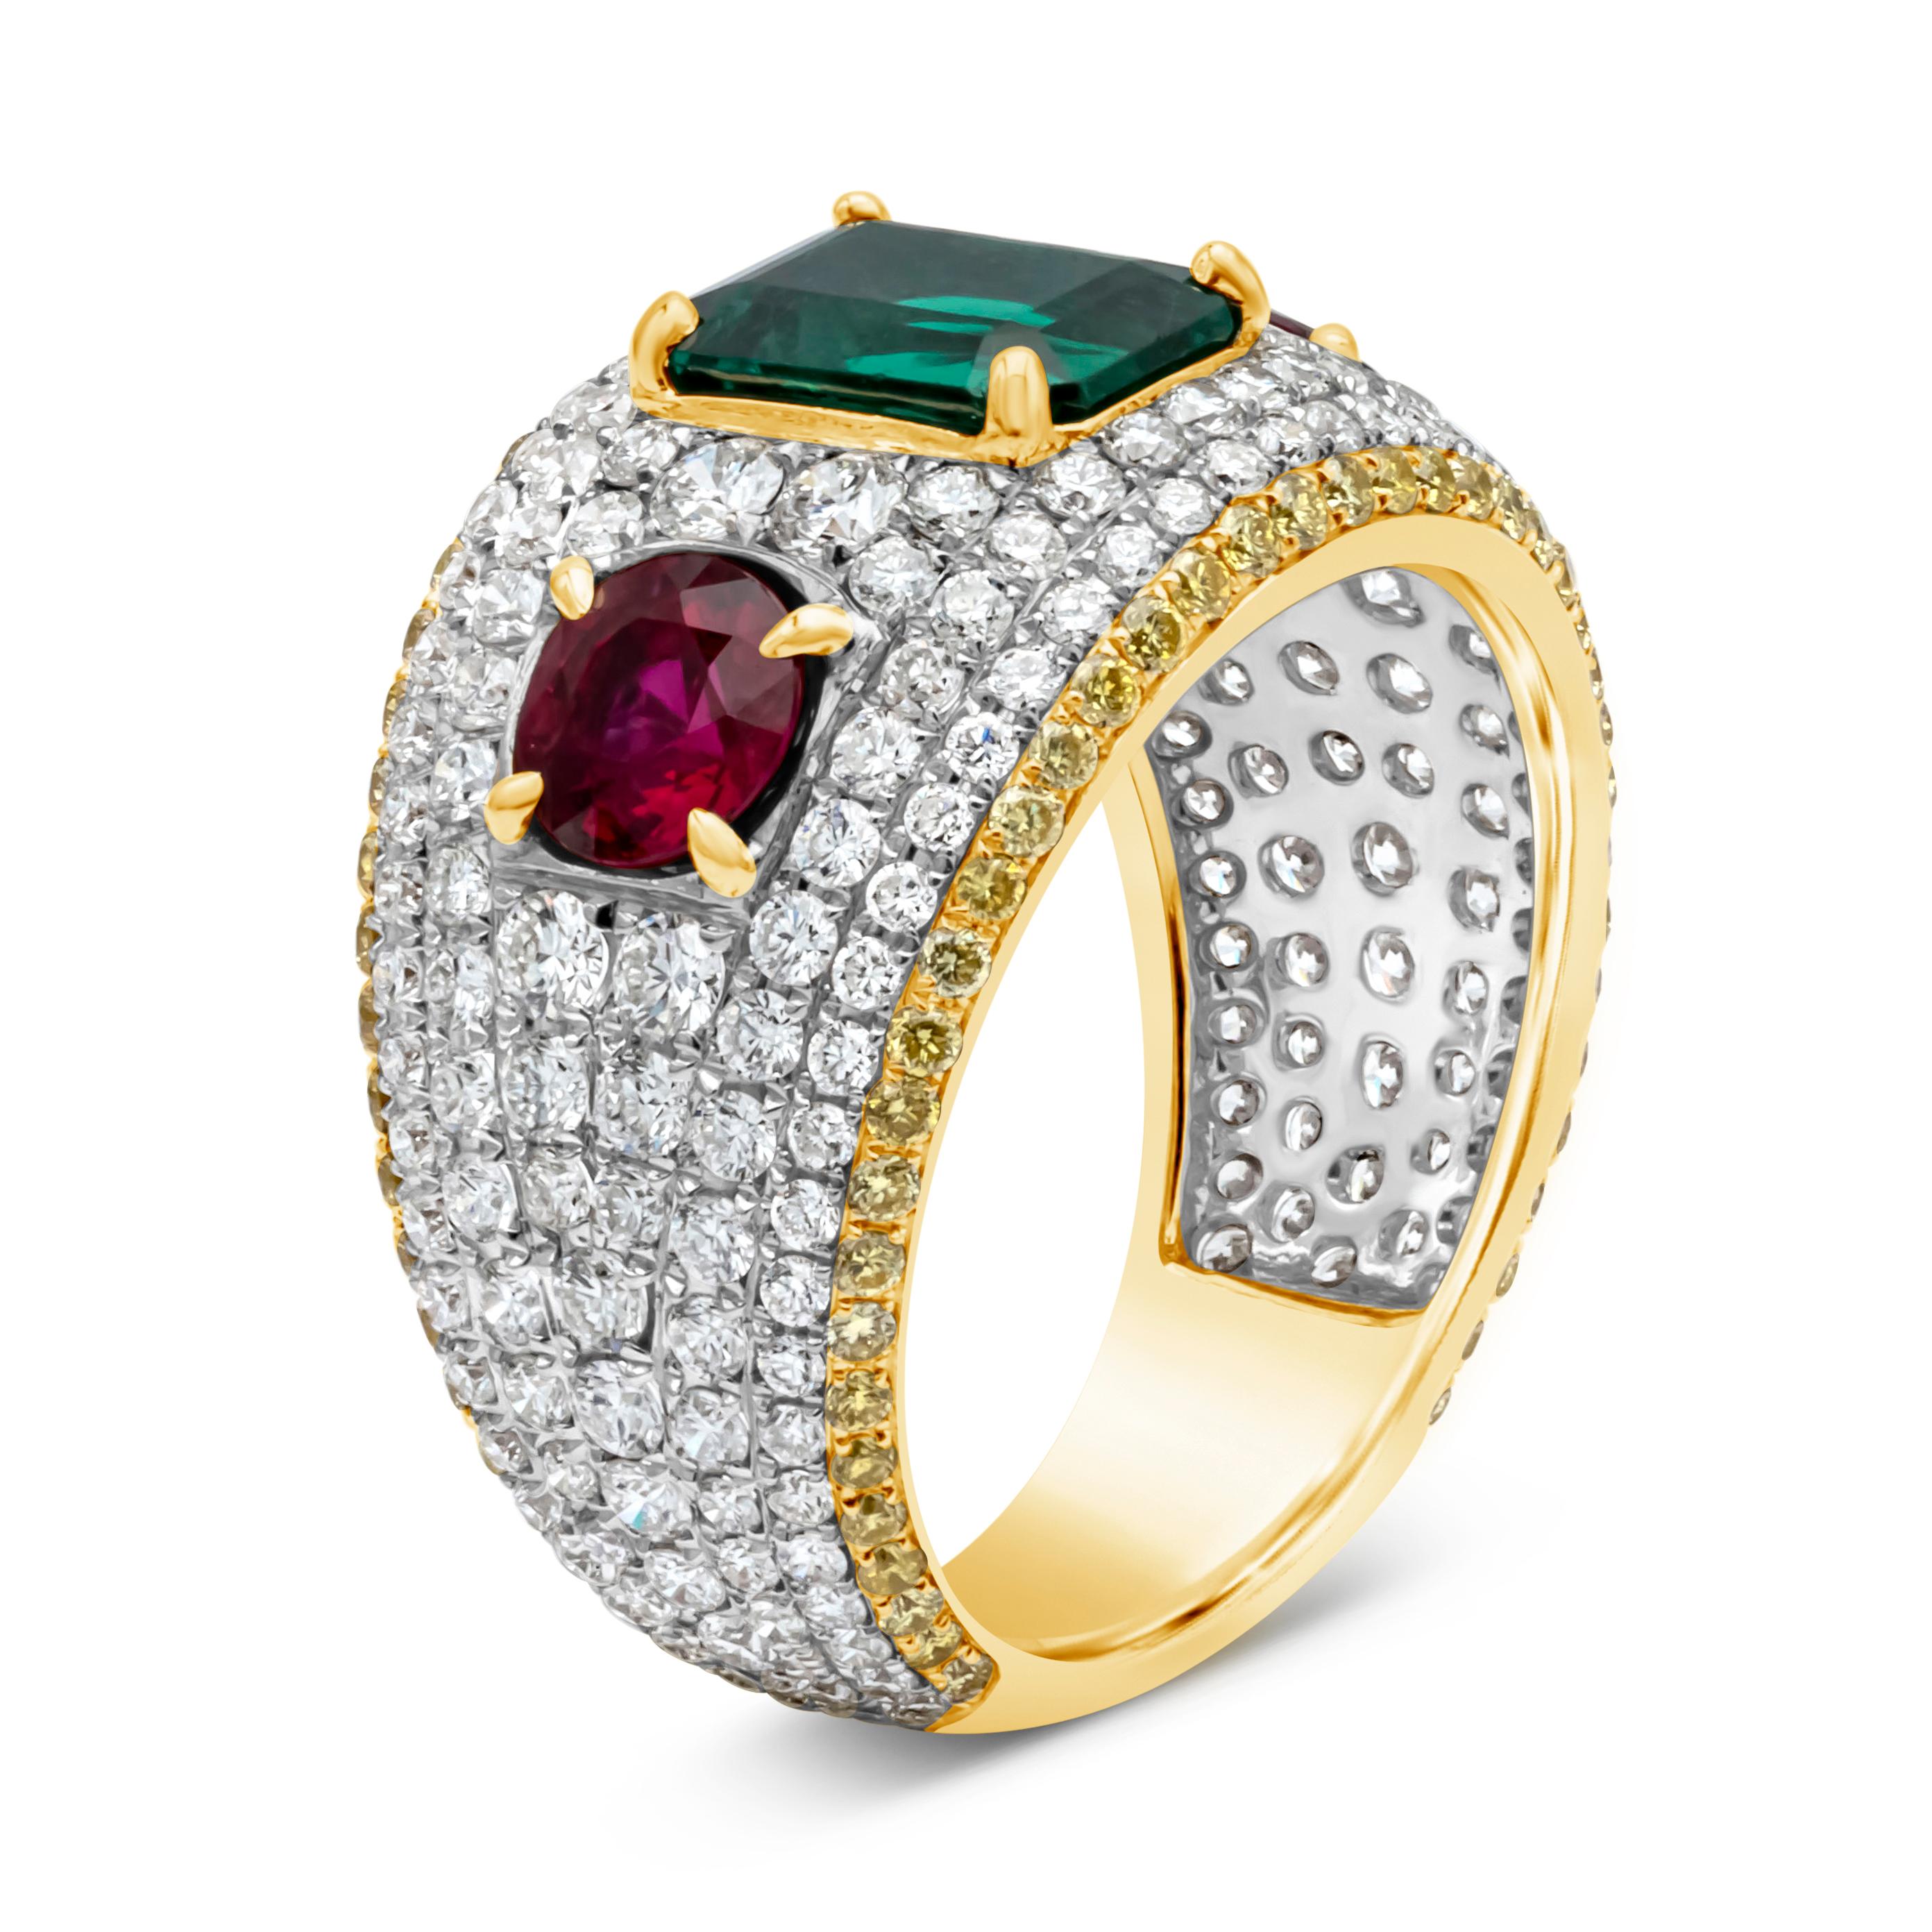 Contemporary GIA Certified 4.91 Carats Total Mixed Cut Emerald, Ruby & Diamond Fashion Ring For Sale